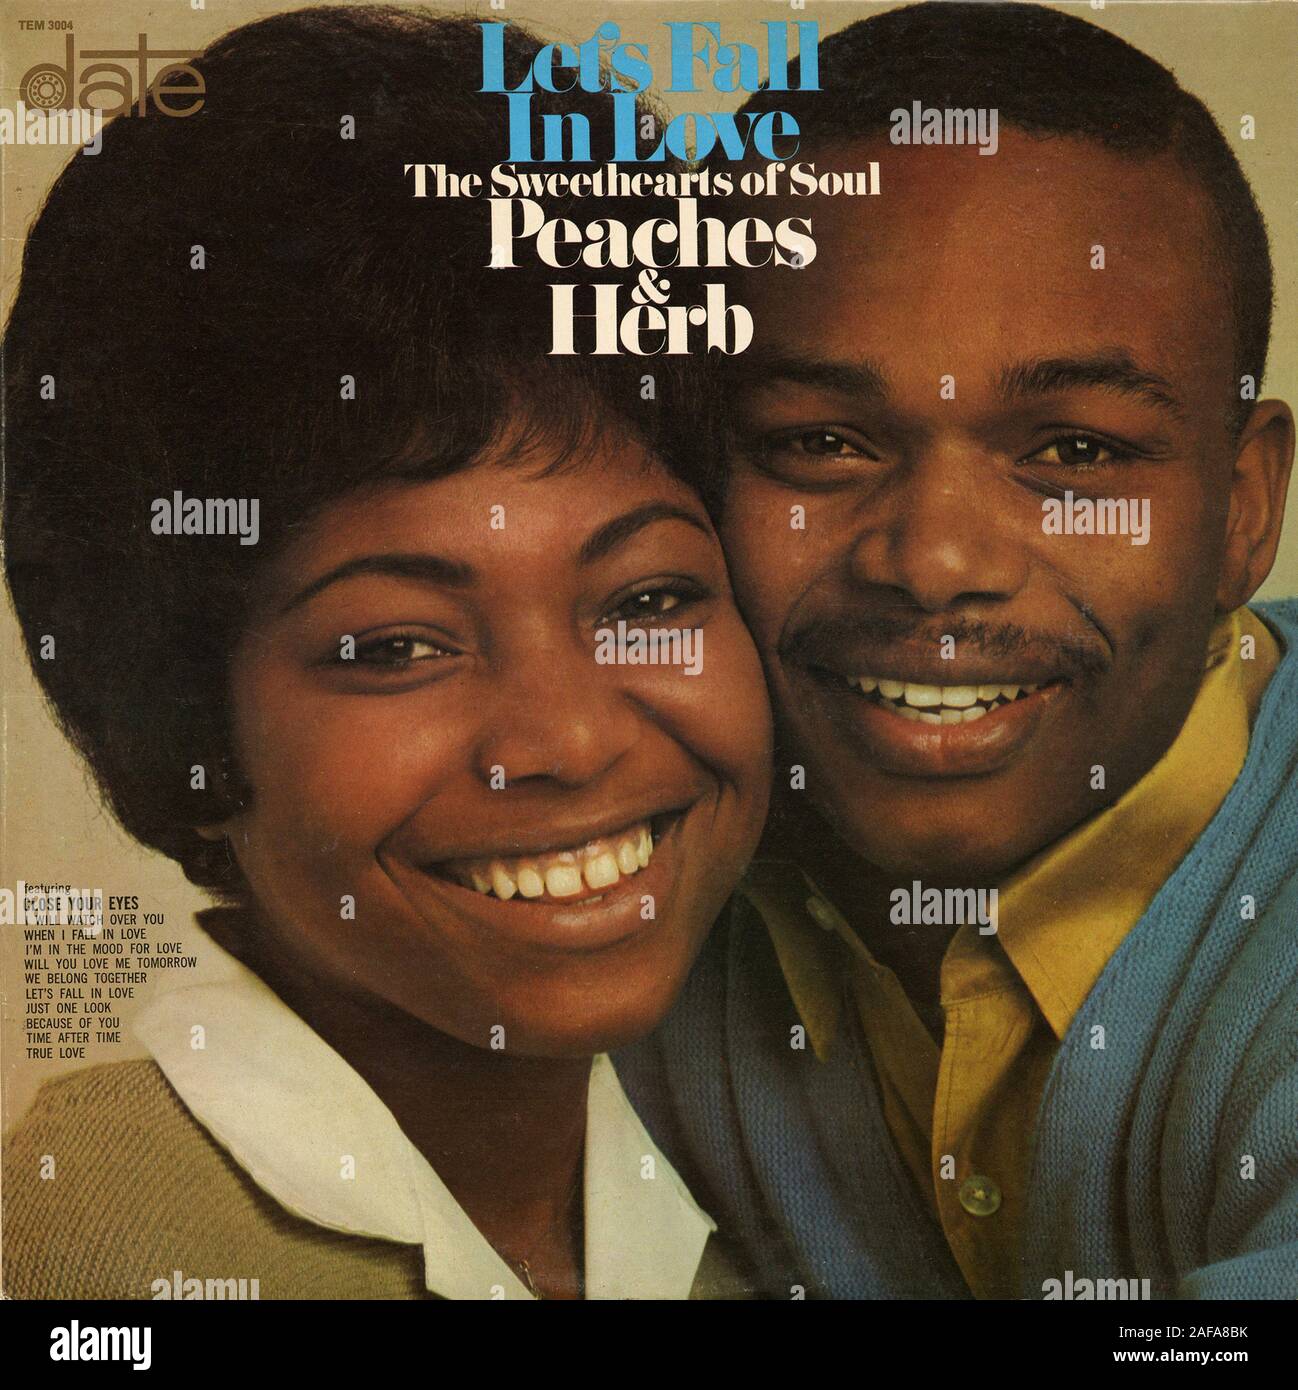 Let's Fall in Love - Peaches and Herb - Vintage vinyl album cover, peaches  and herb 